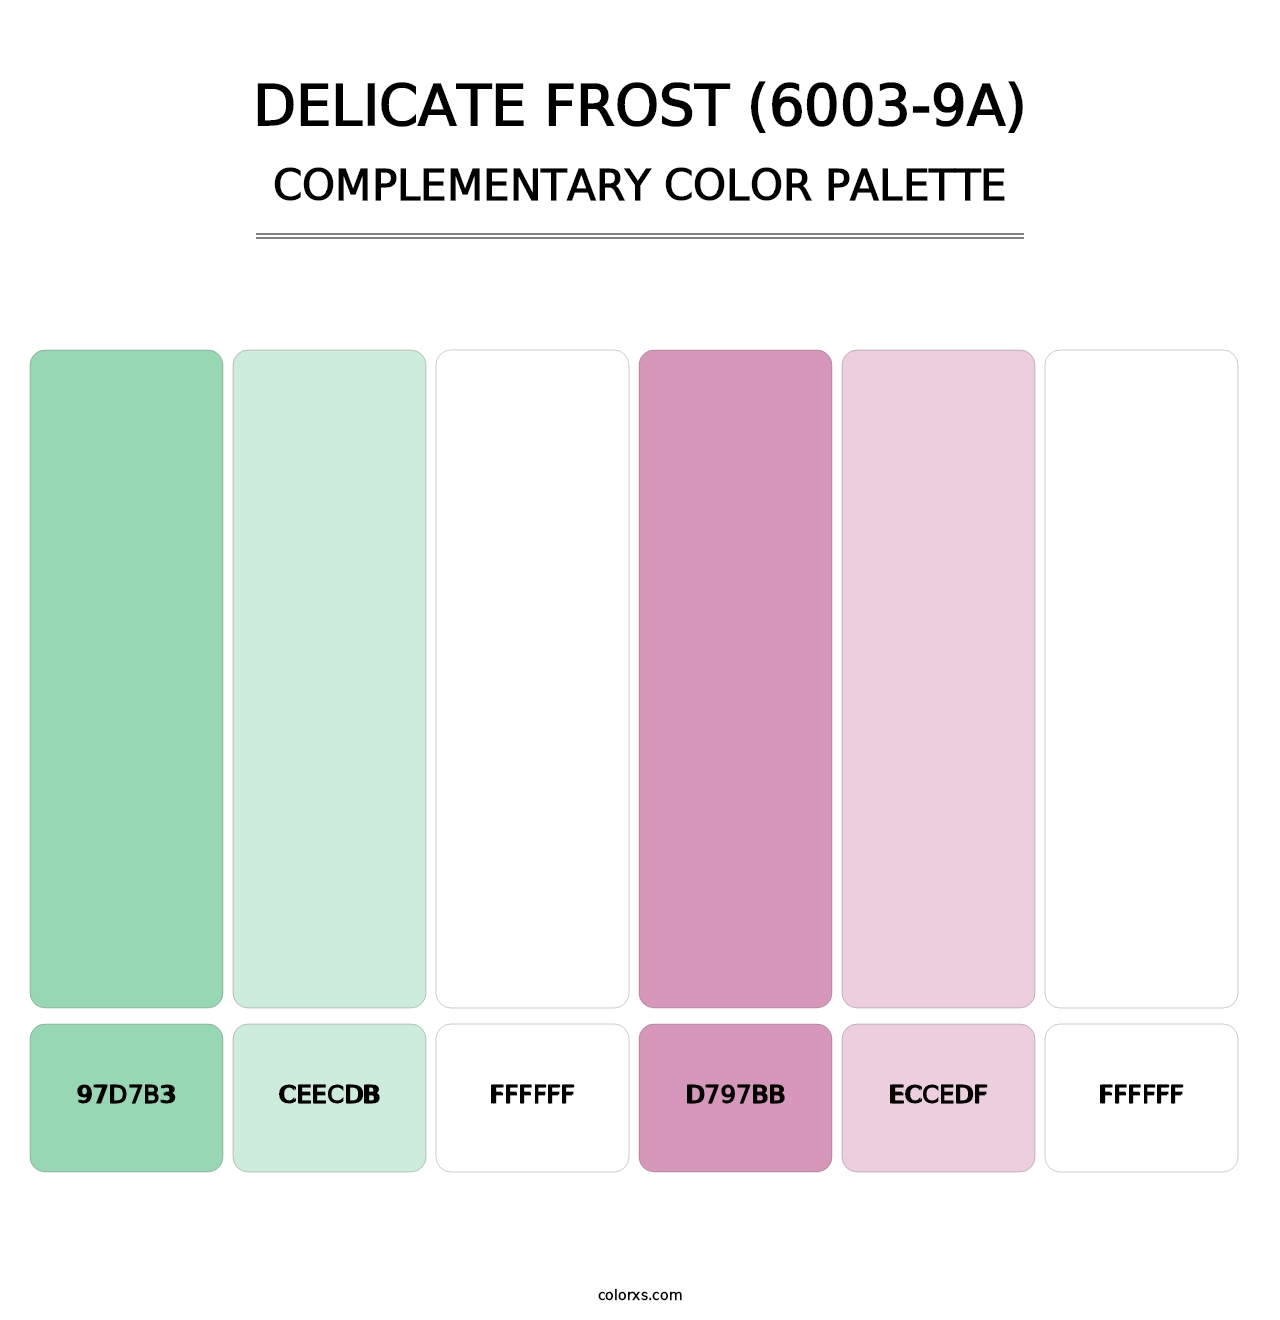 Delicate Frost (6003-9A) - Complementary Color Palette